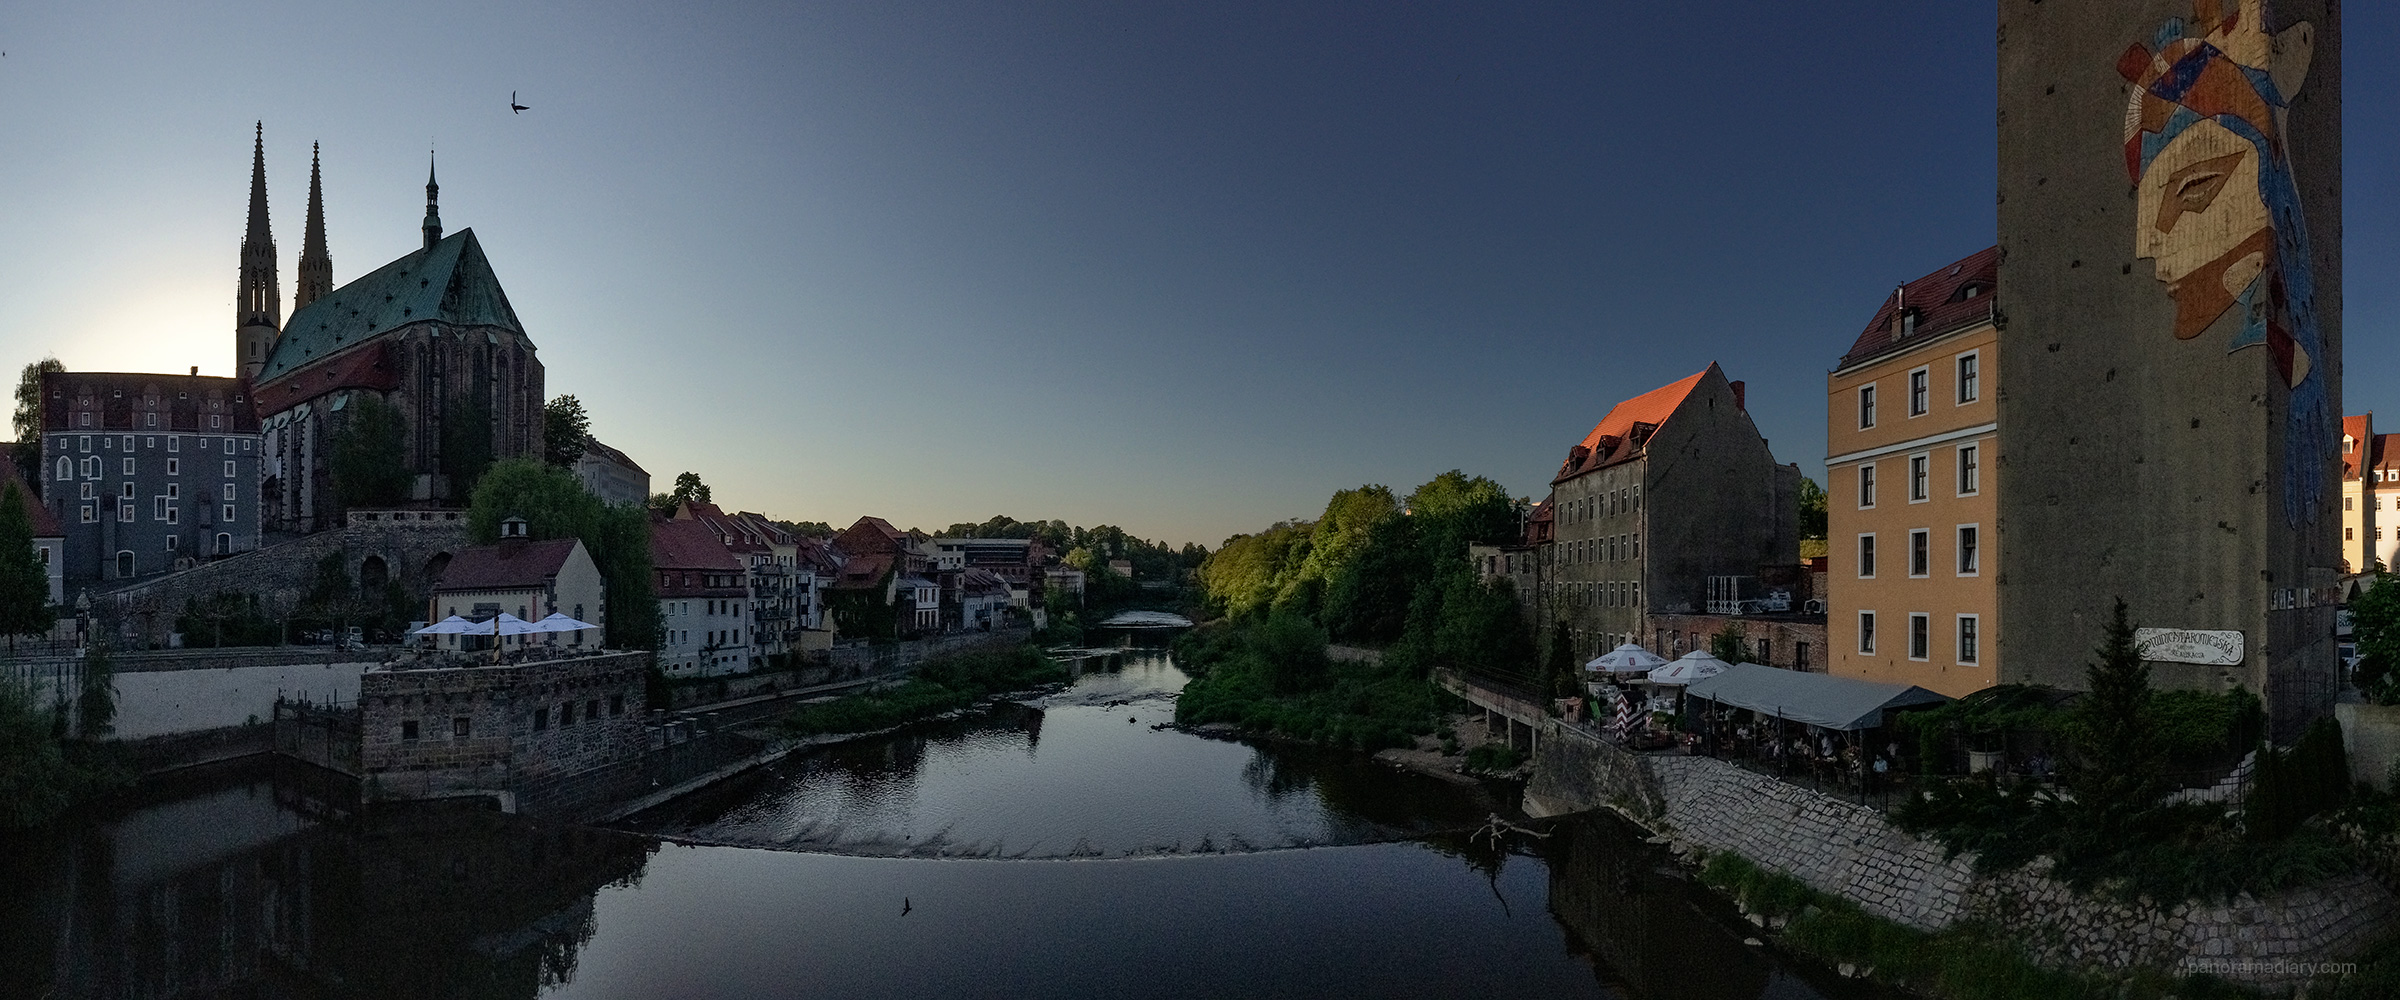 PANORAMA DIARY | Gorlitz-Zgorzelec, a city divided by two